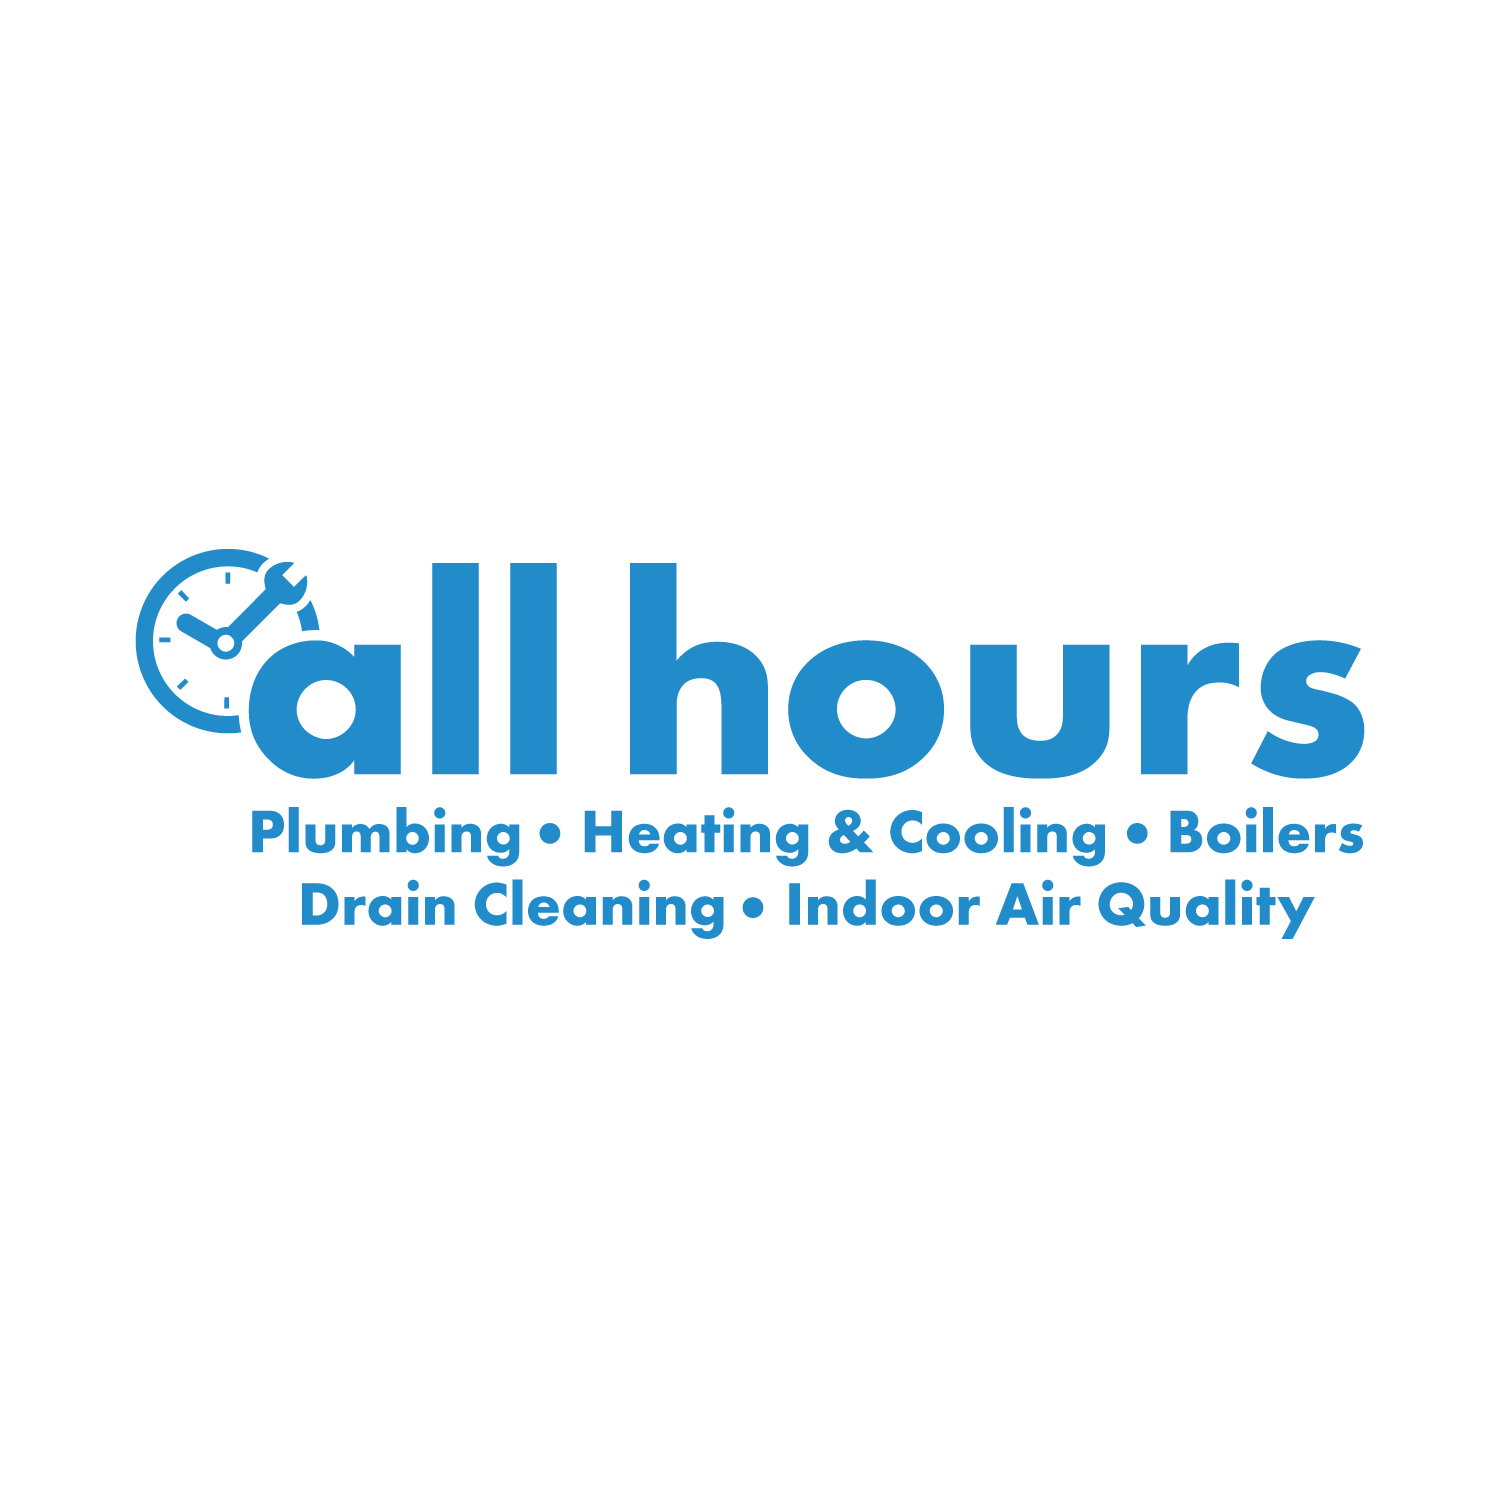 All Hours Plumbing, Drain Cleaning, Heating & Cooling